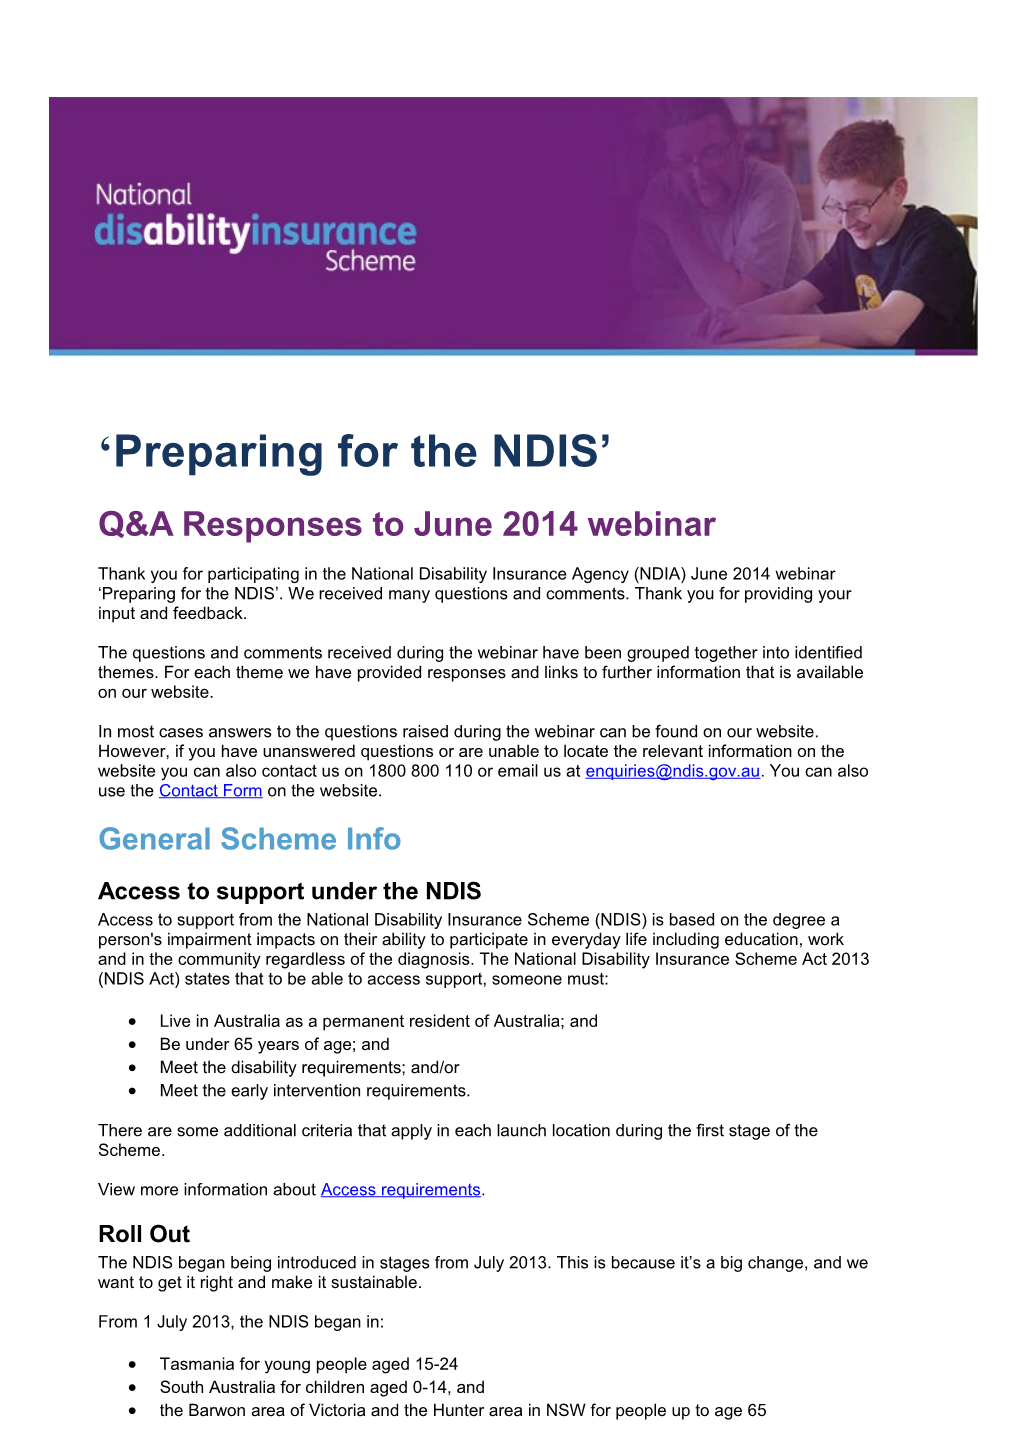 Preparing for the NDIS Q&A Responses to June 2014 Webinar